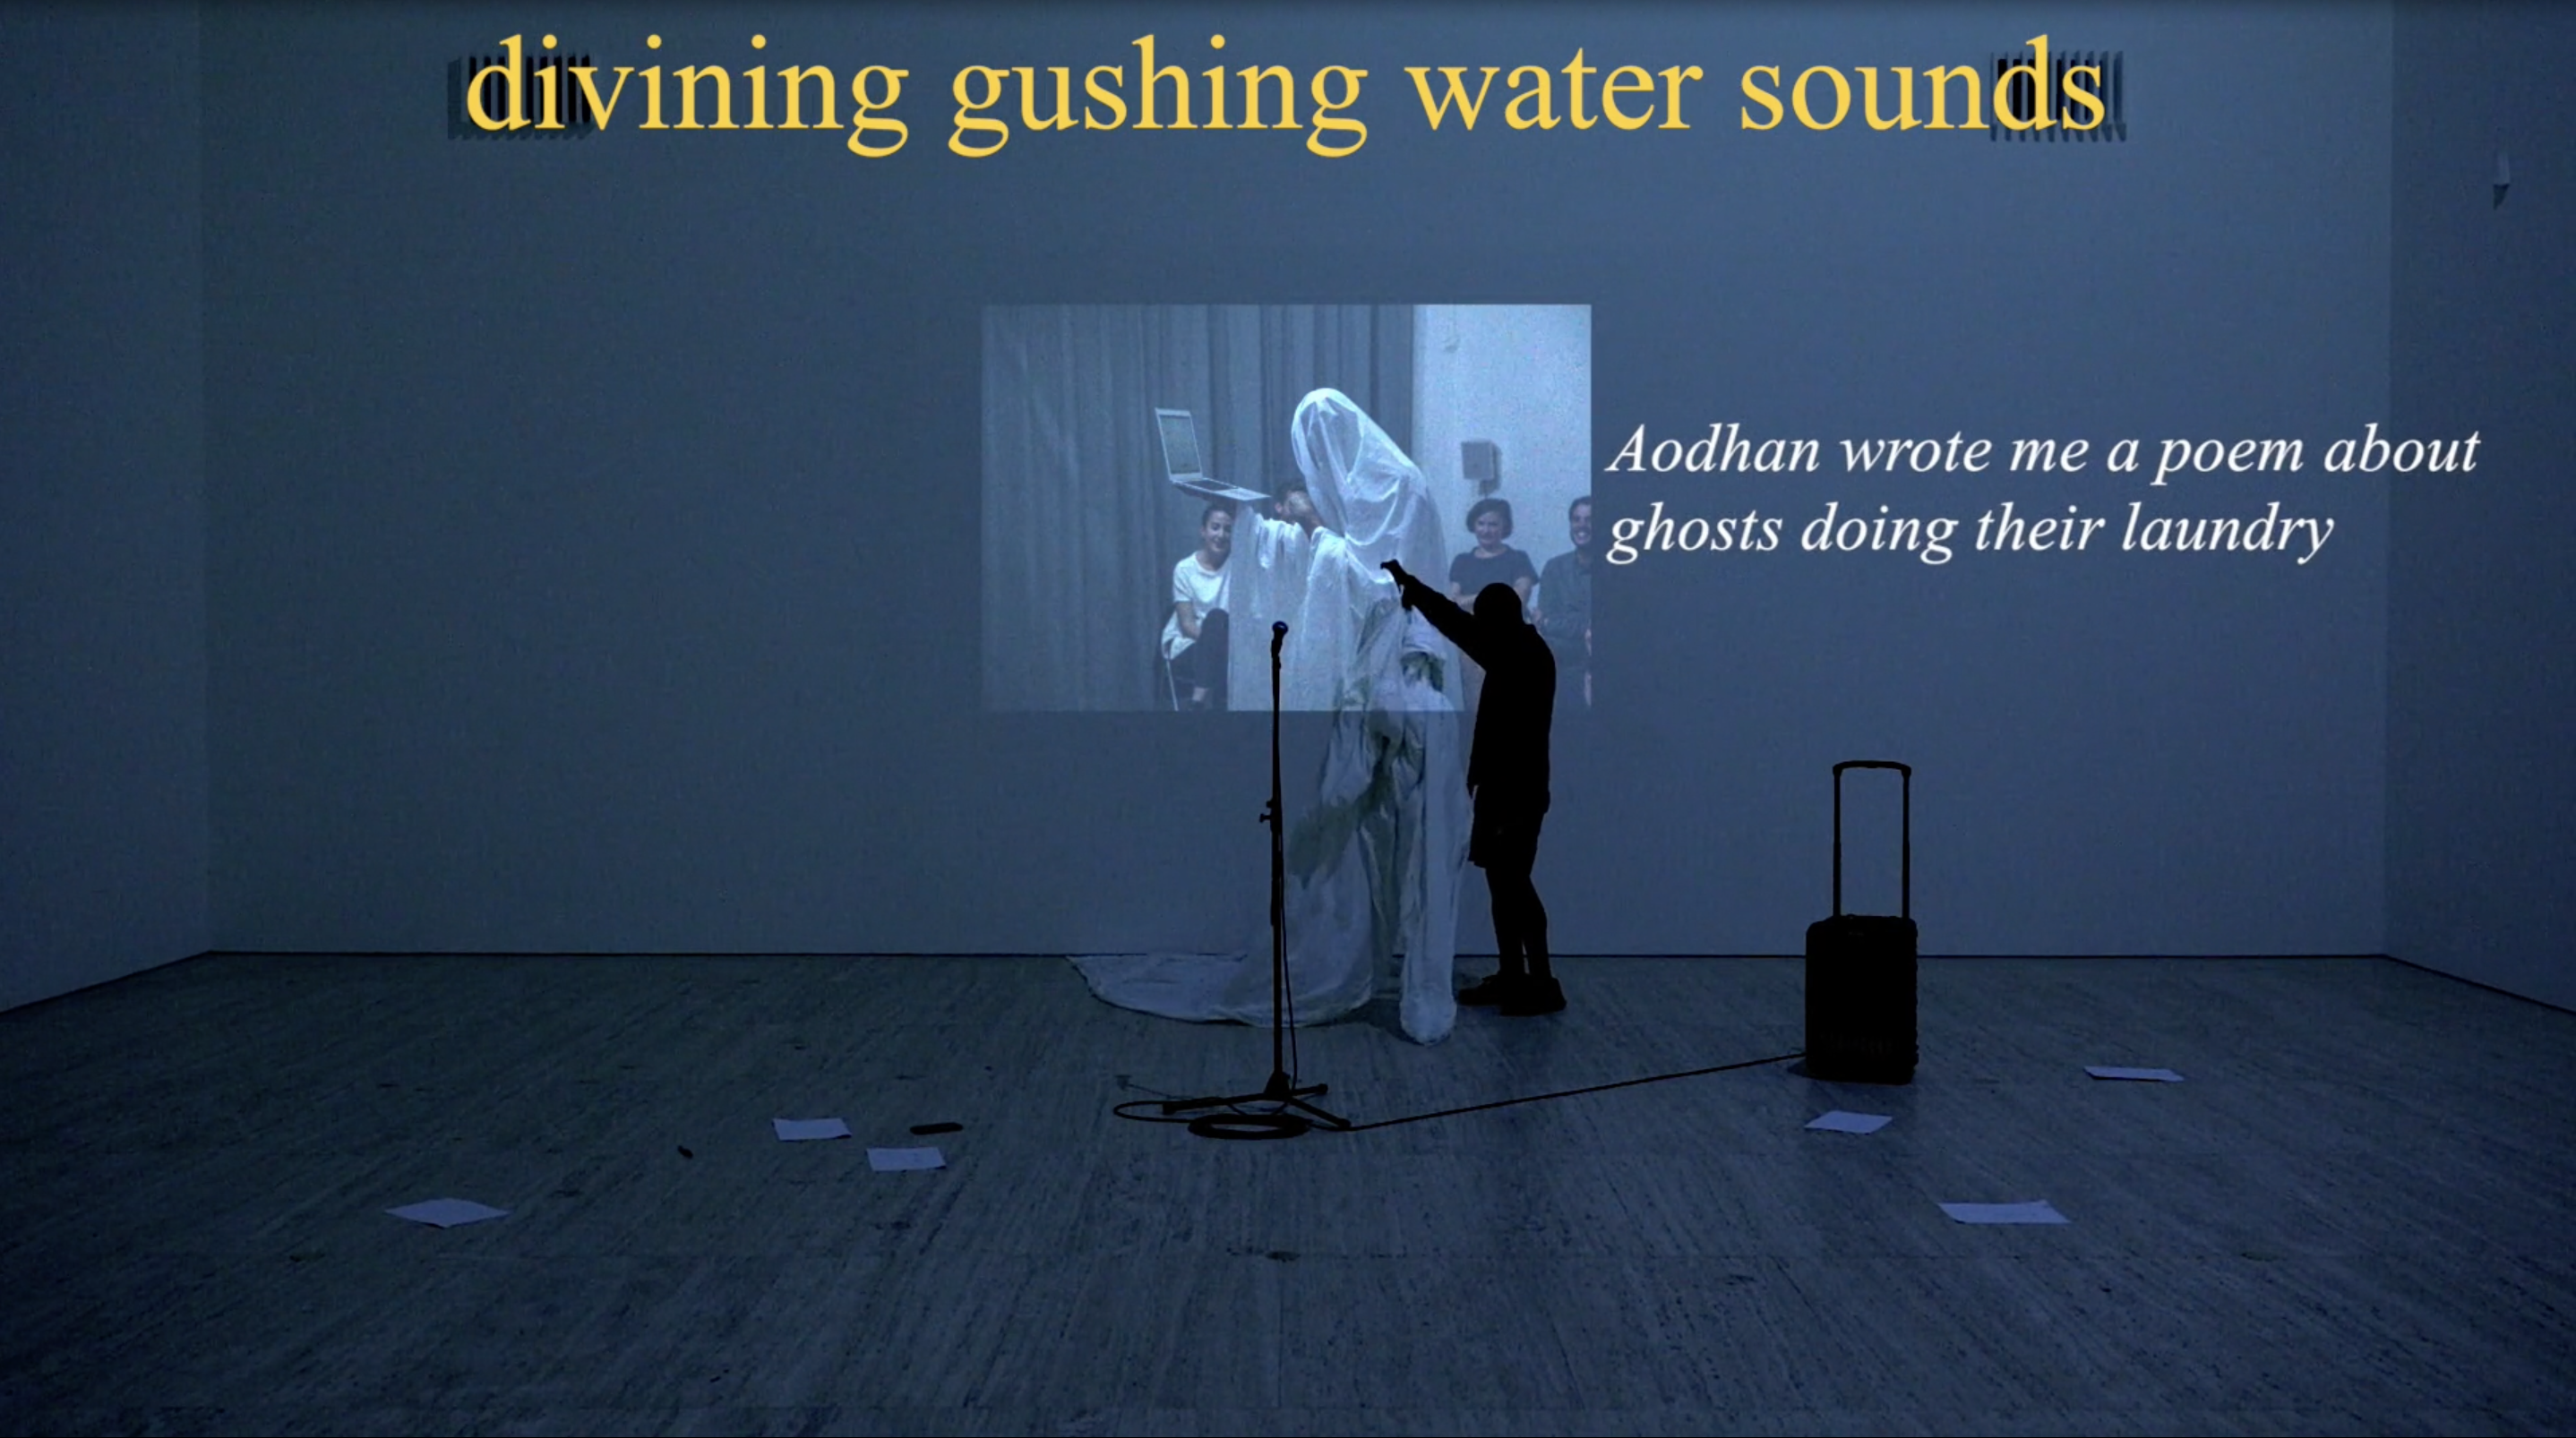 An image of Brian Fuata performing as a ghost behind a blue backdrop and a projected image, with a microphone and speaker set on the ground, alongside a banner of text that reads "diving gushing water sounds" in yellow at the top center of the image, with other text on the right side that reads "Aodhan wrote me a poem about ghosts doing their laundry."